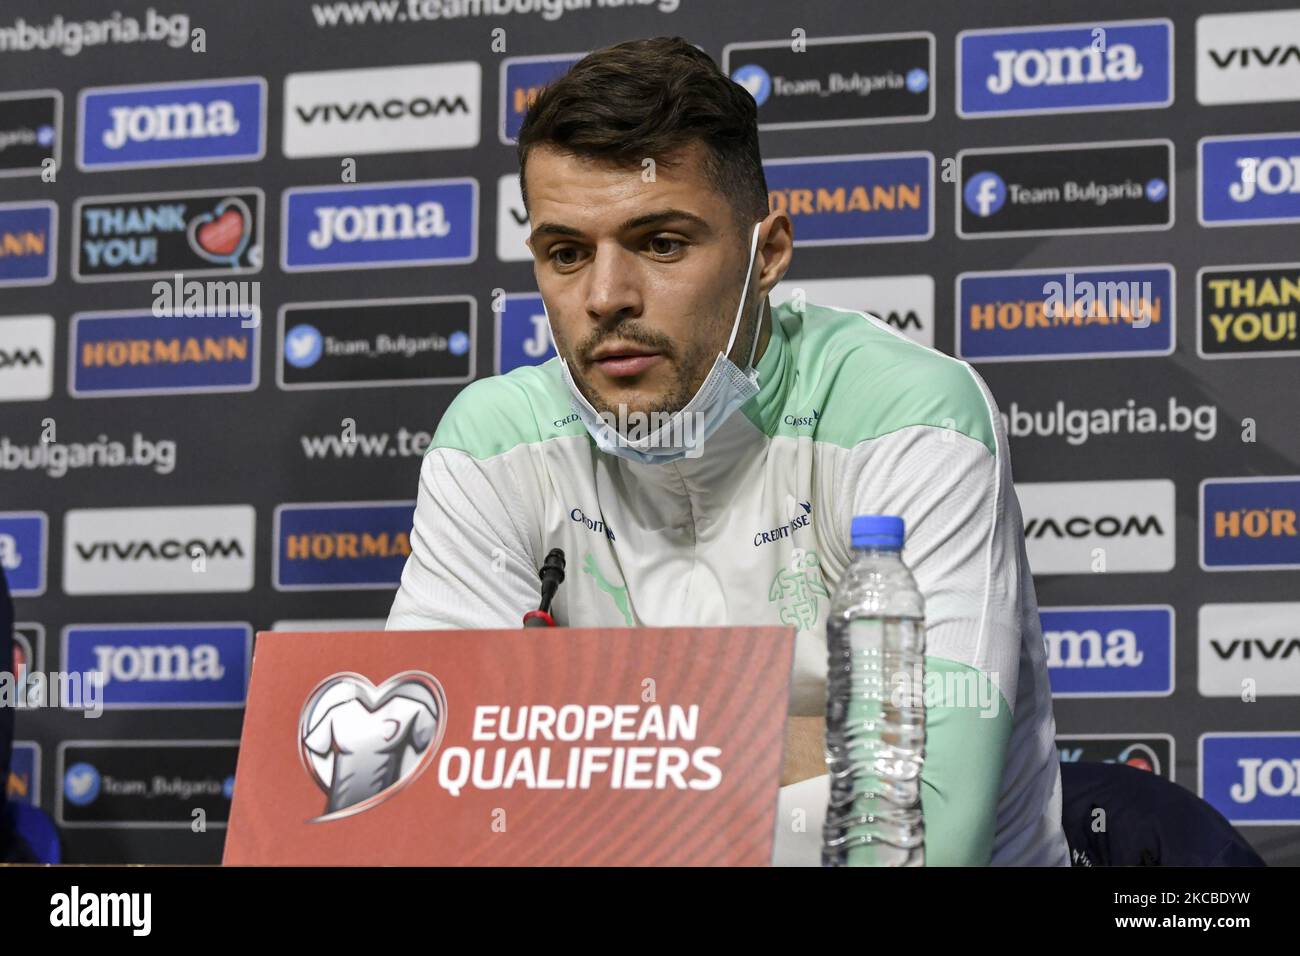 Swiss national team player Granit Xhaka attend a press conference in Sofia, Bulgaria, 24 March 2021. Switzerland will face Bulgaria in their FIFA World Cup 2022 qualification group C soccer match on 25 March 2021. (Photo by Georgi Paleykov/NurPhoto) Stock Photo